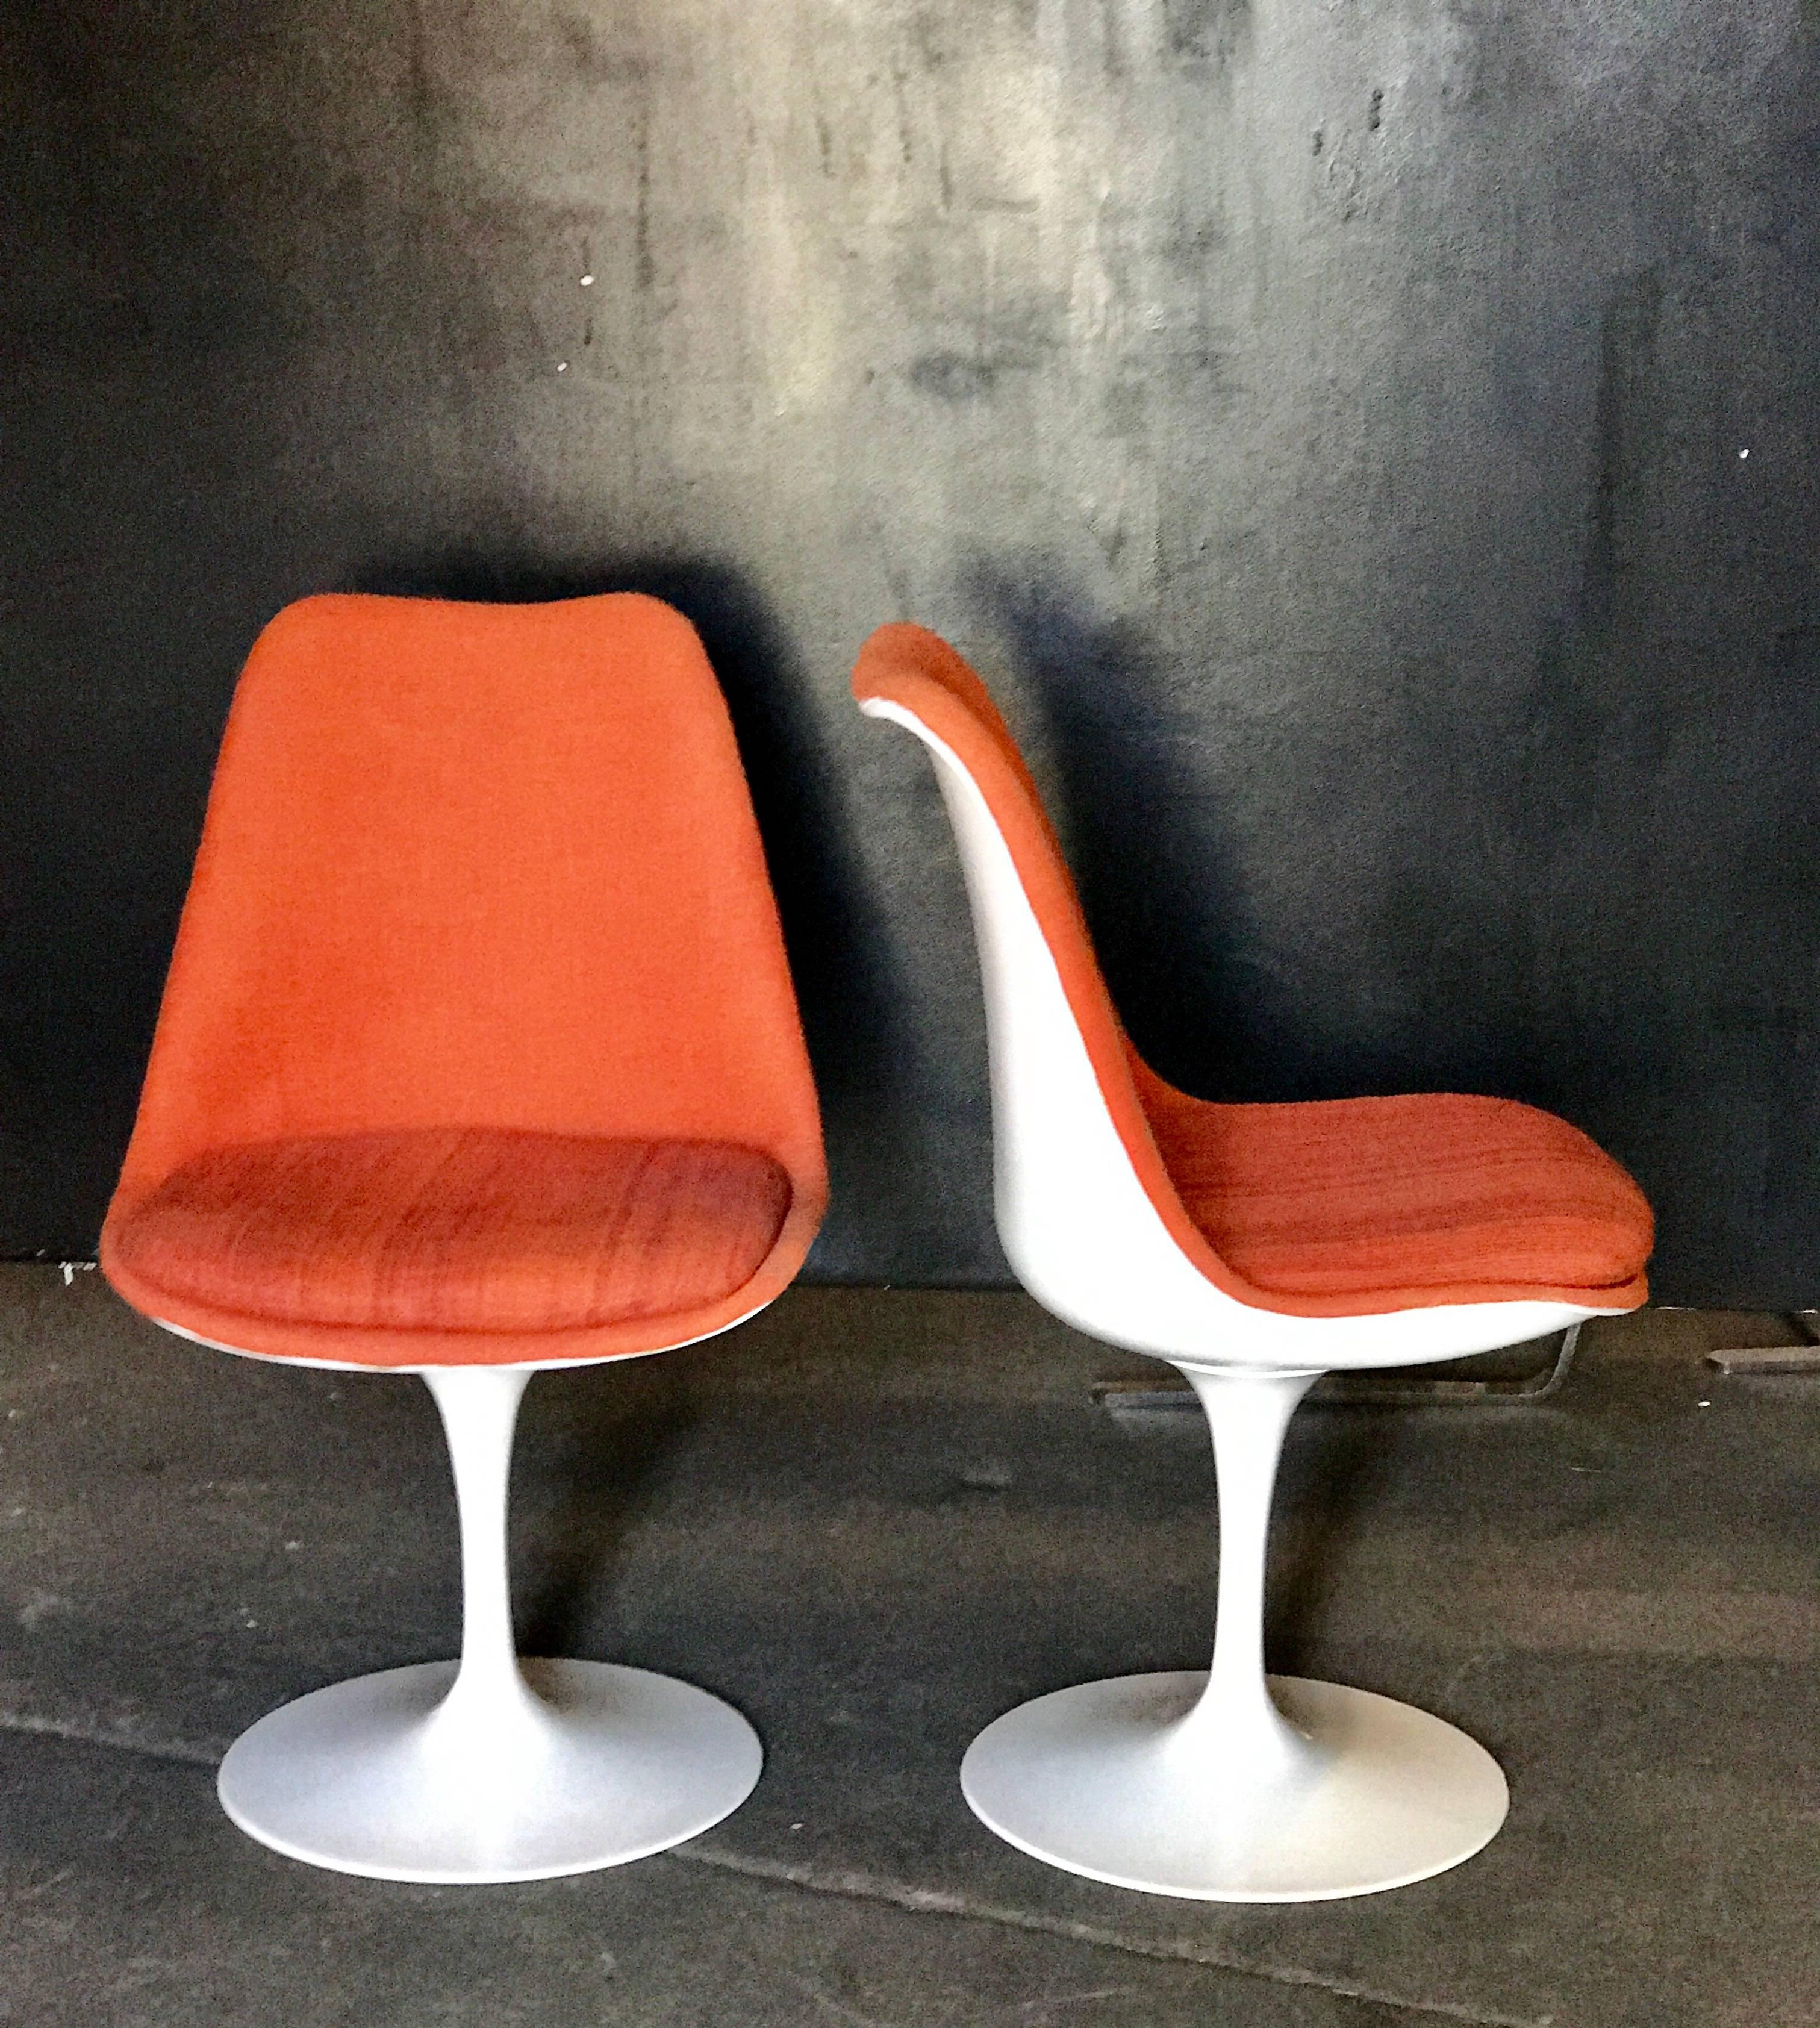 Pair of Saarinen swiveling orange side chairs. Now take a ride on these babies.